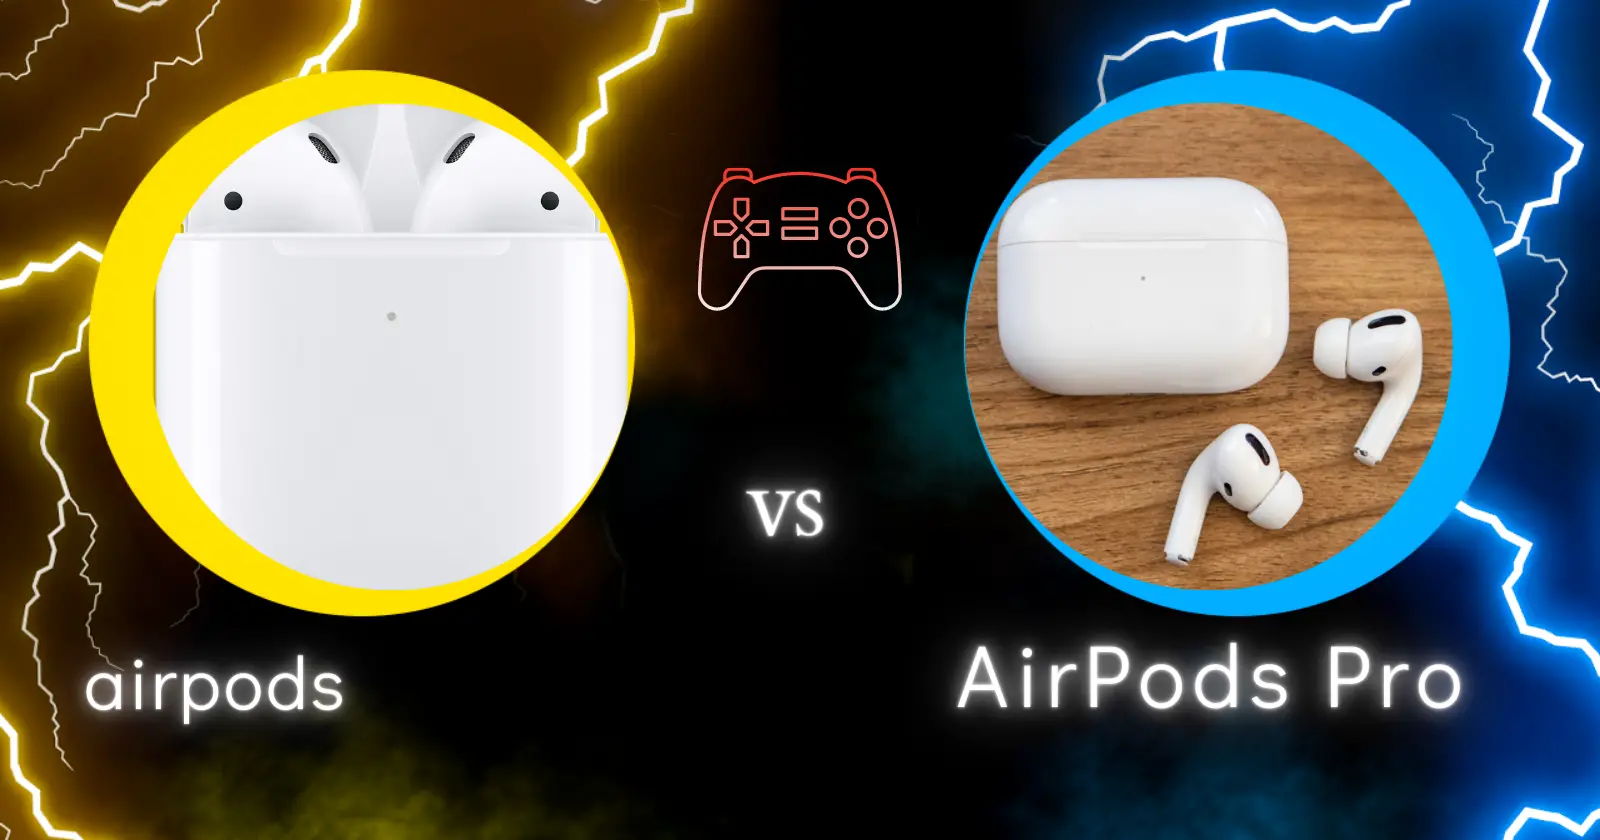 AirPods vs AirPods Pro Battery Life - AirPods vs AirPods Pro Battery Life Which Lasts Longer